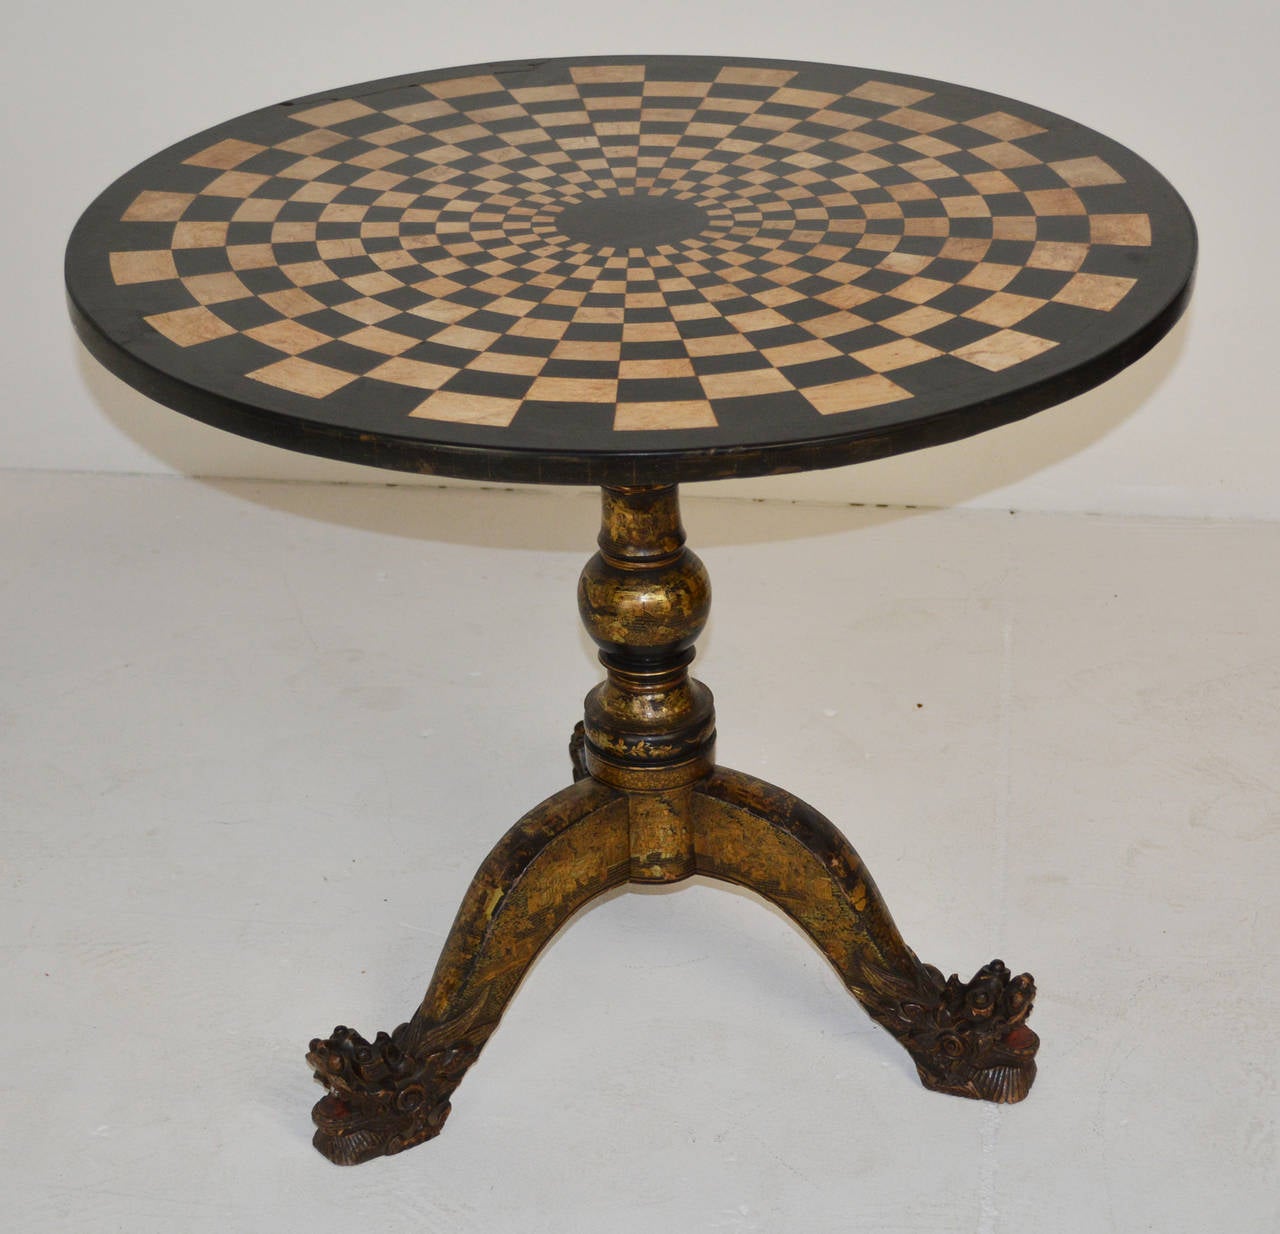 An exceptional 19th century English tripod table with a mosaic marble and slate intarsia top on a turned and carved baluster support terminating in a dragon-motif carved tripod base; of black and red lacquer grounds with gilt decoration of figural